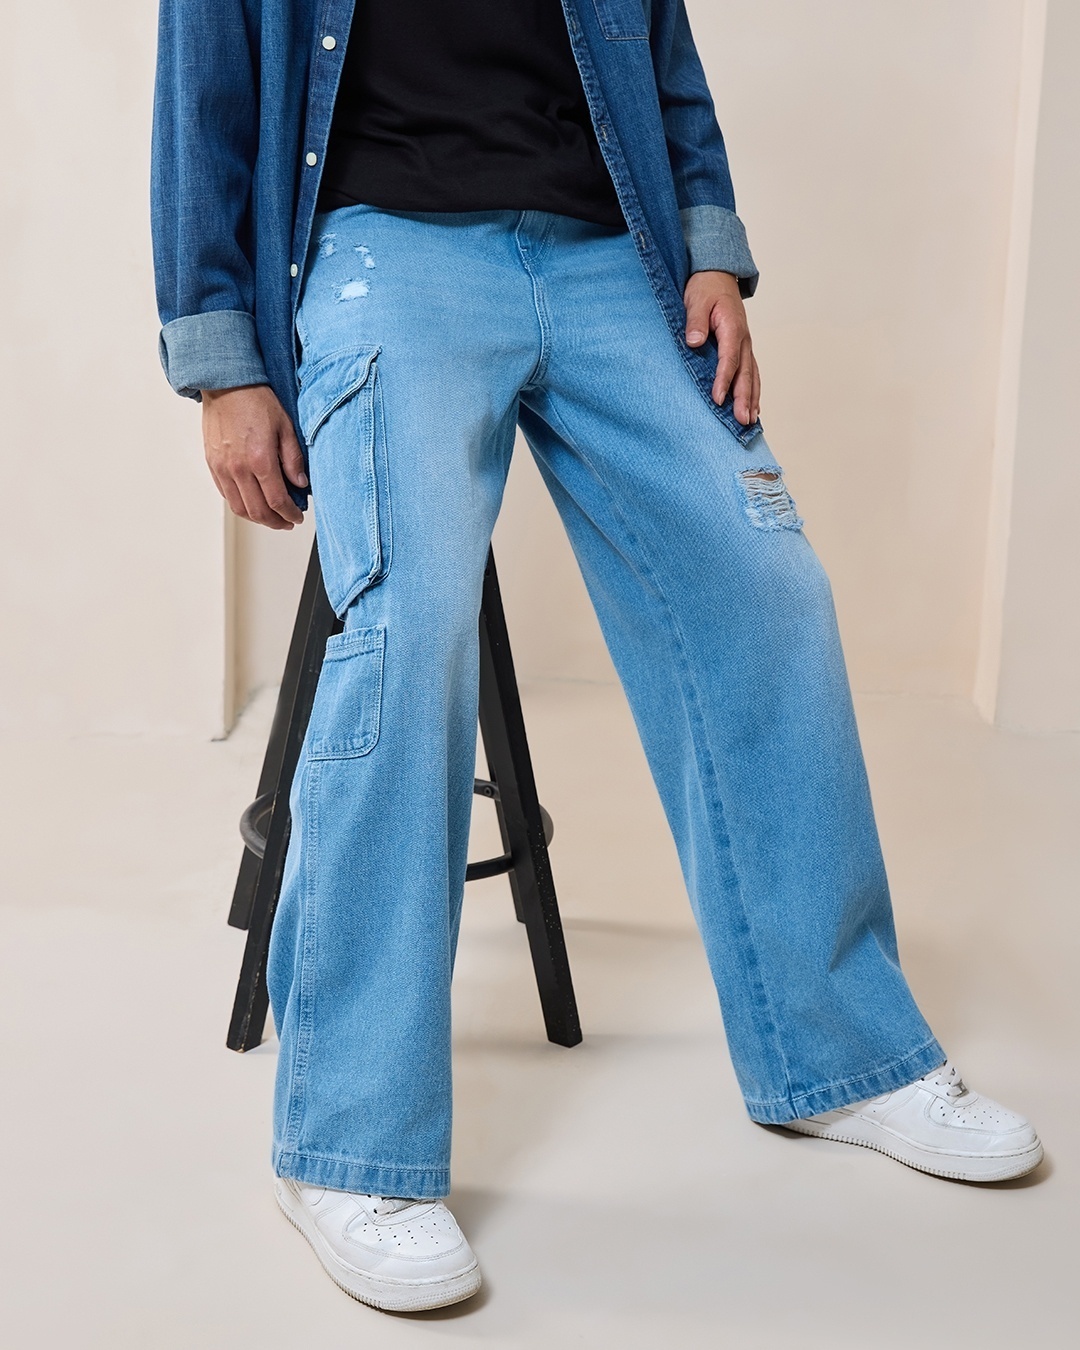 Model wearing baggy pants with Navy Blue T-shirt